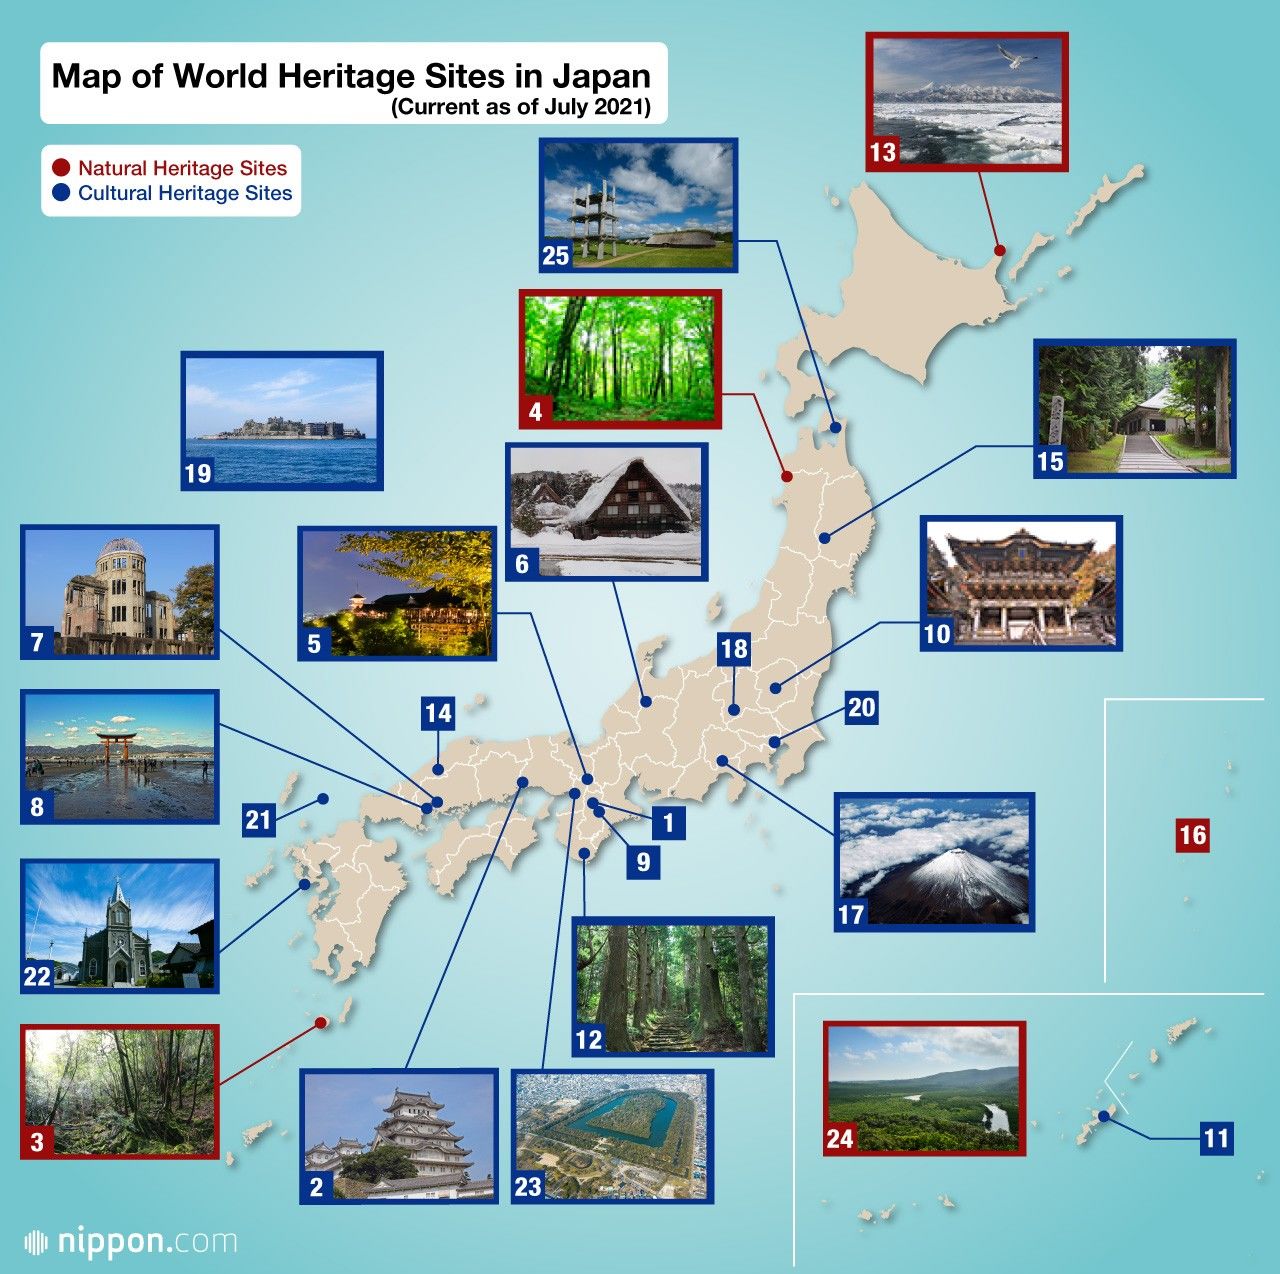 Japan’s 25 UNESCO World Heritage Sites: New Additions Highlight Prehistory and Biodiversity